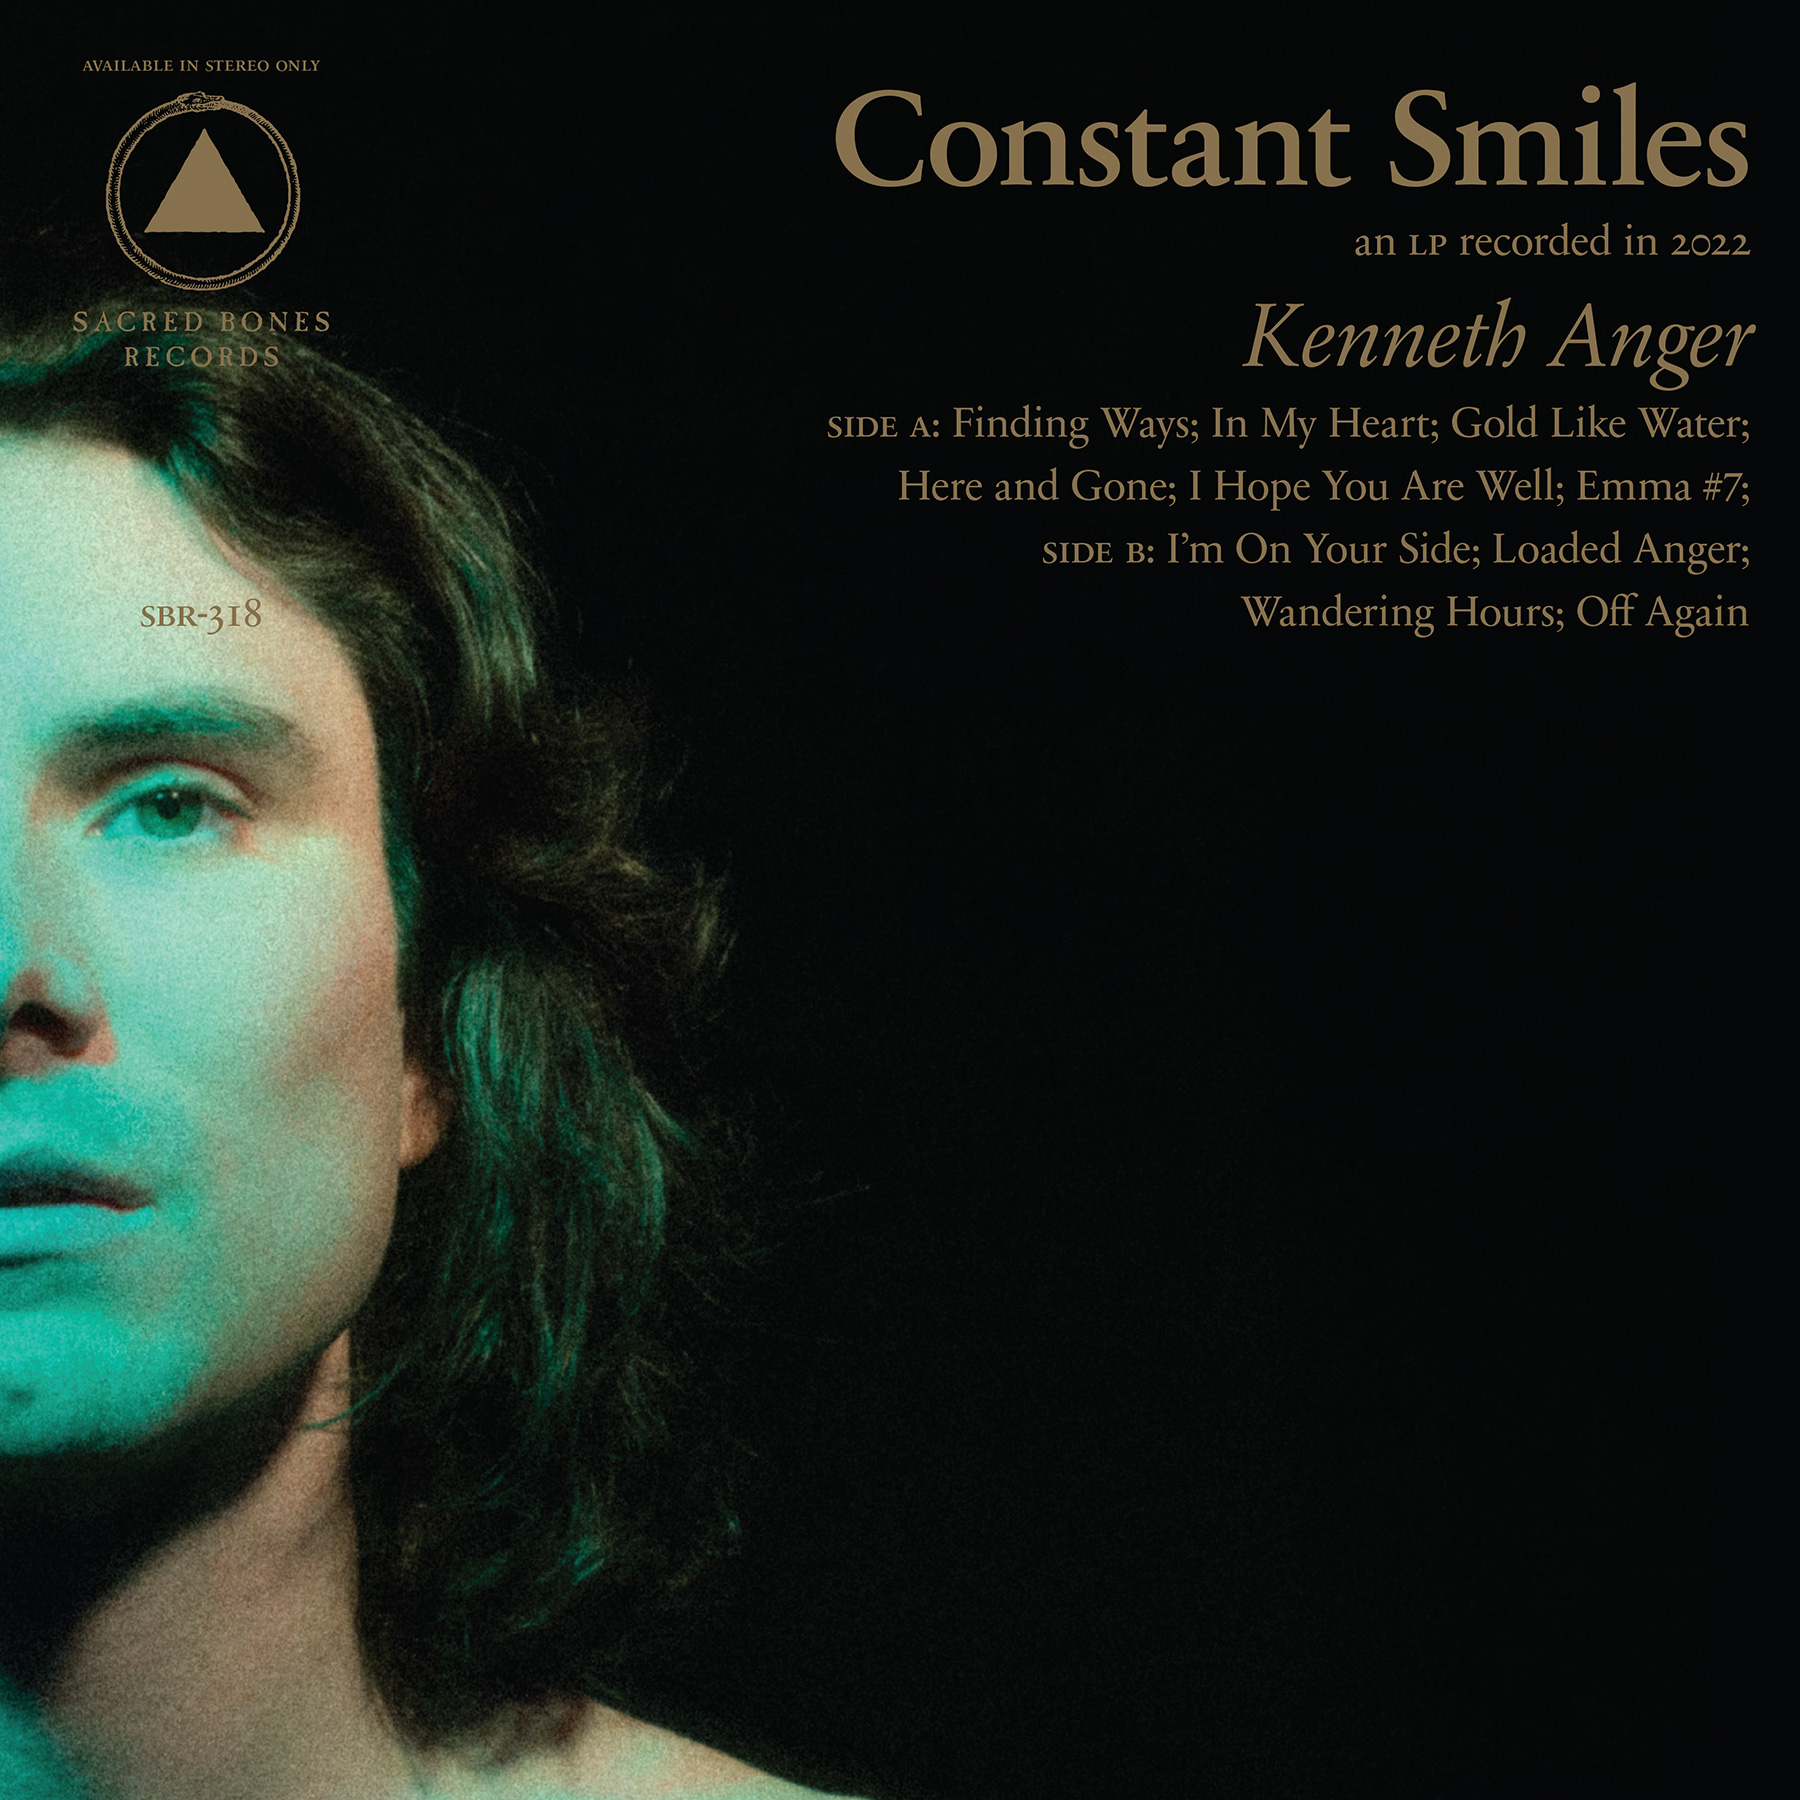 Constant Smiles - Kenneth Anger - CD